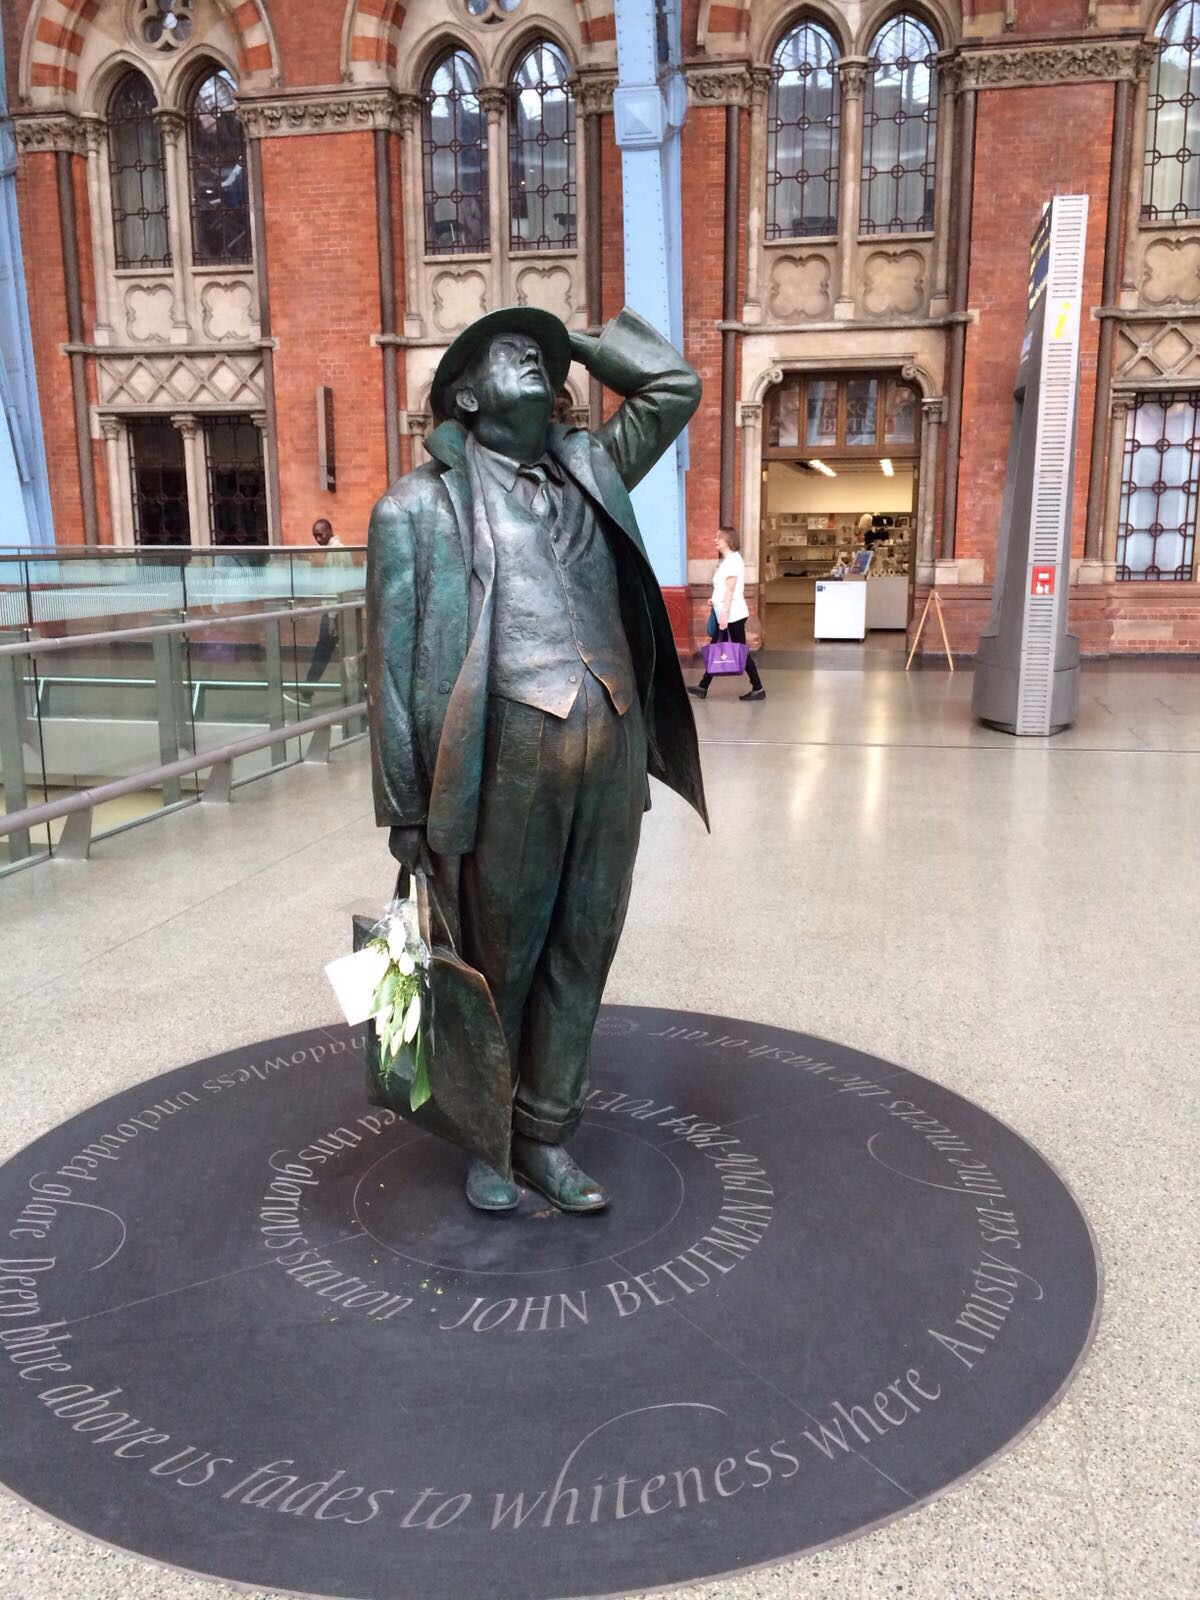 Sir John Betjeman  and an embracing couple  can't be missed at the iconic 'meeting place' in St. Pancras Station